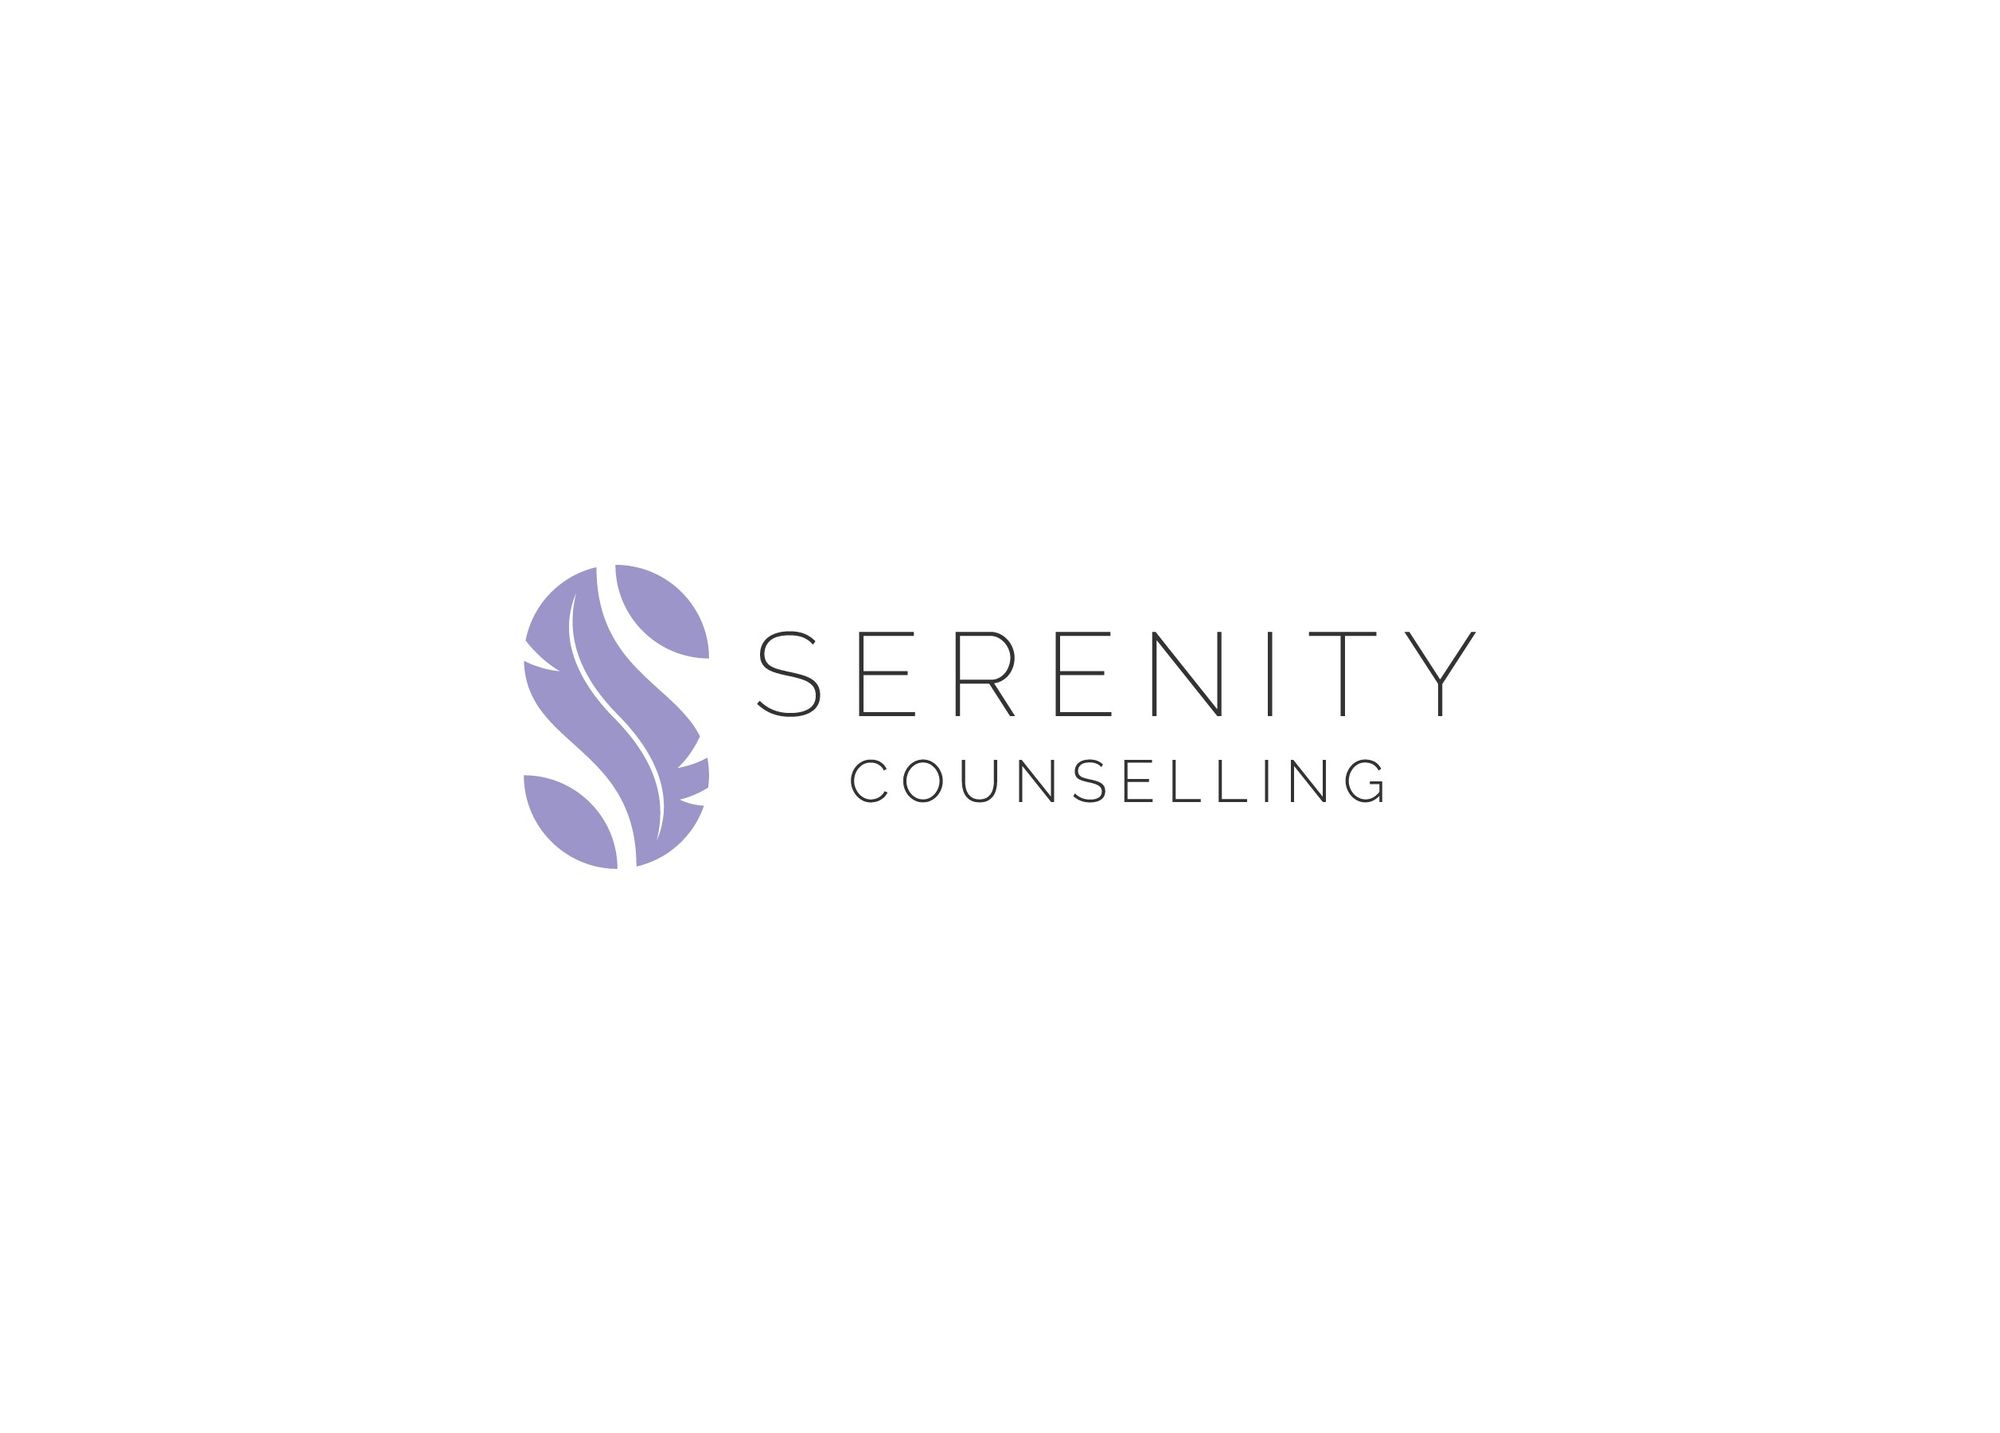 Client-Centered Therapy - Serenity Counselling